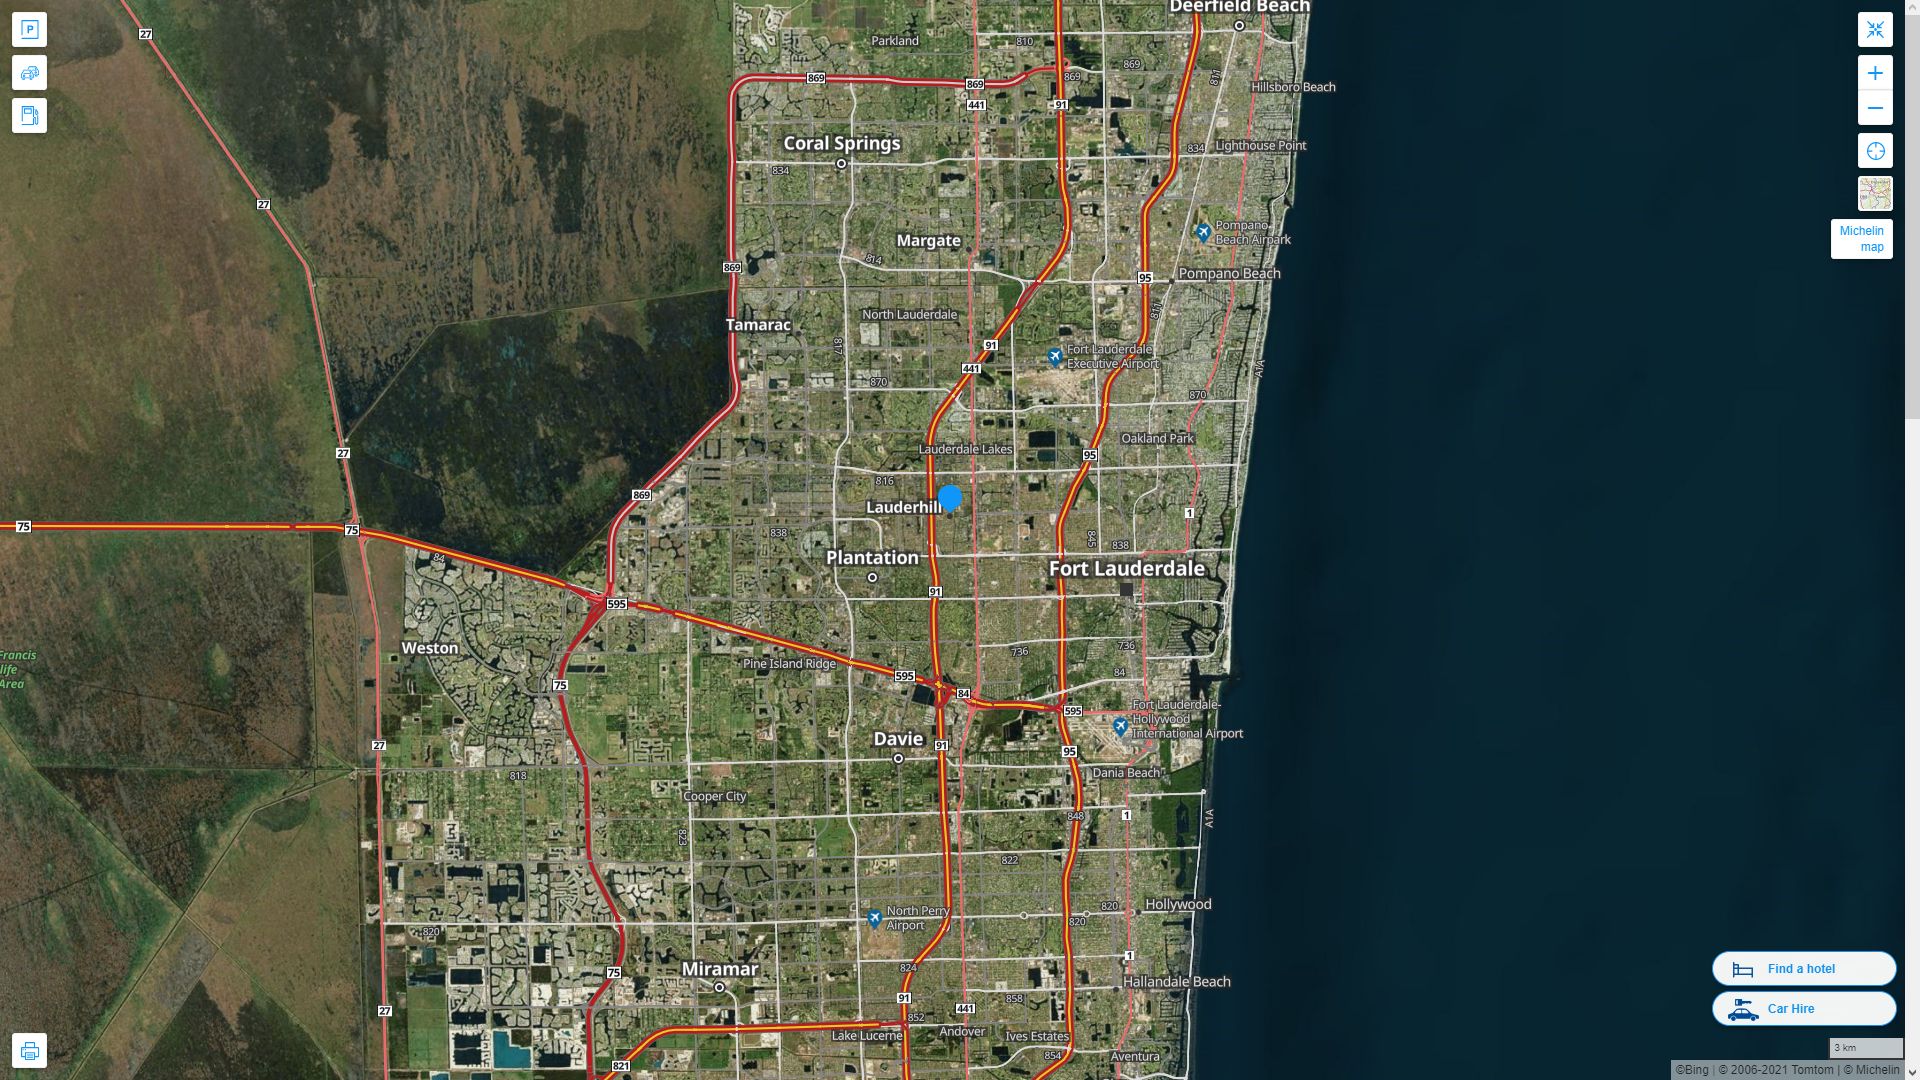 Lauderhill Florida Highway and Road Map with Satellite View